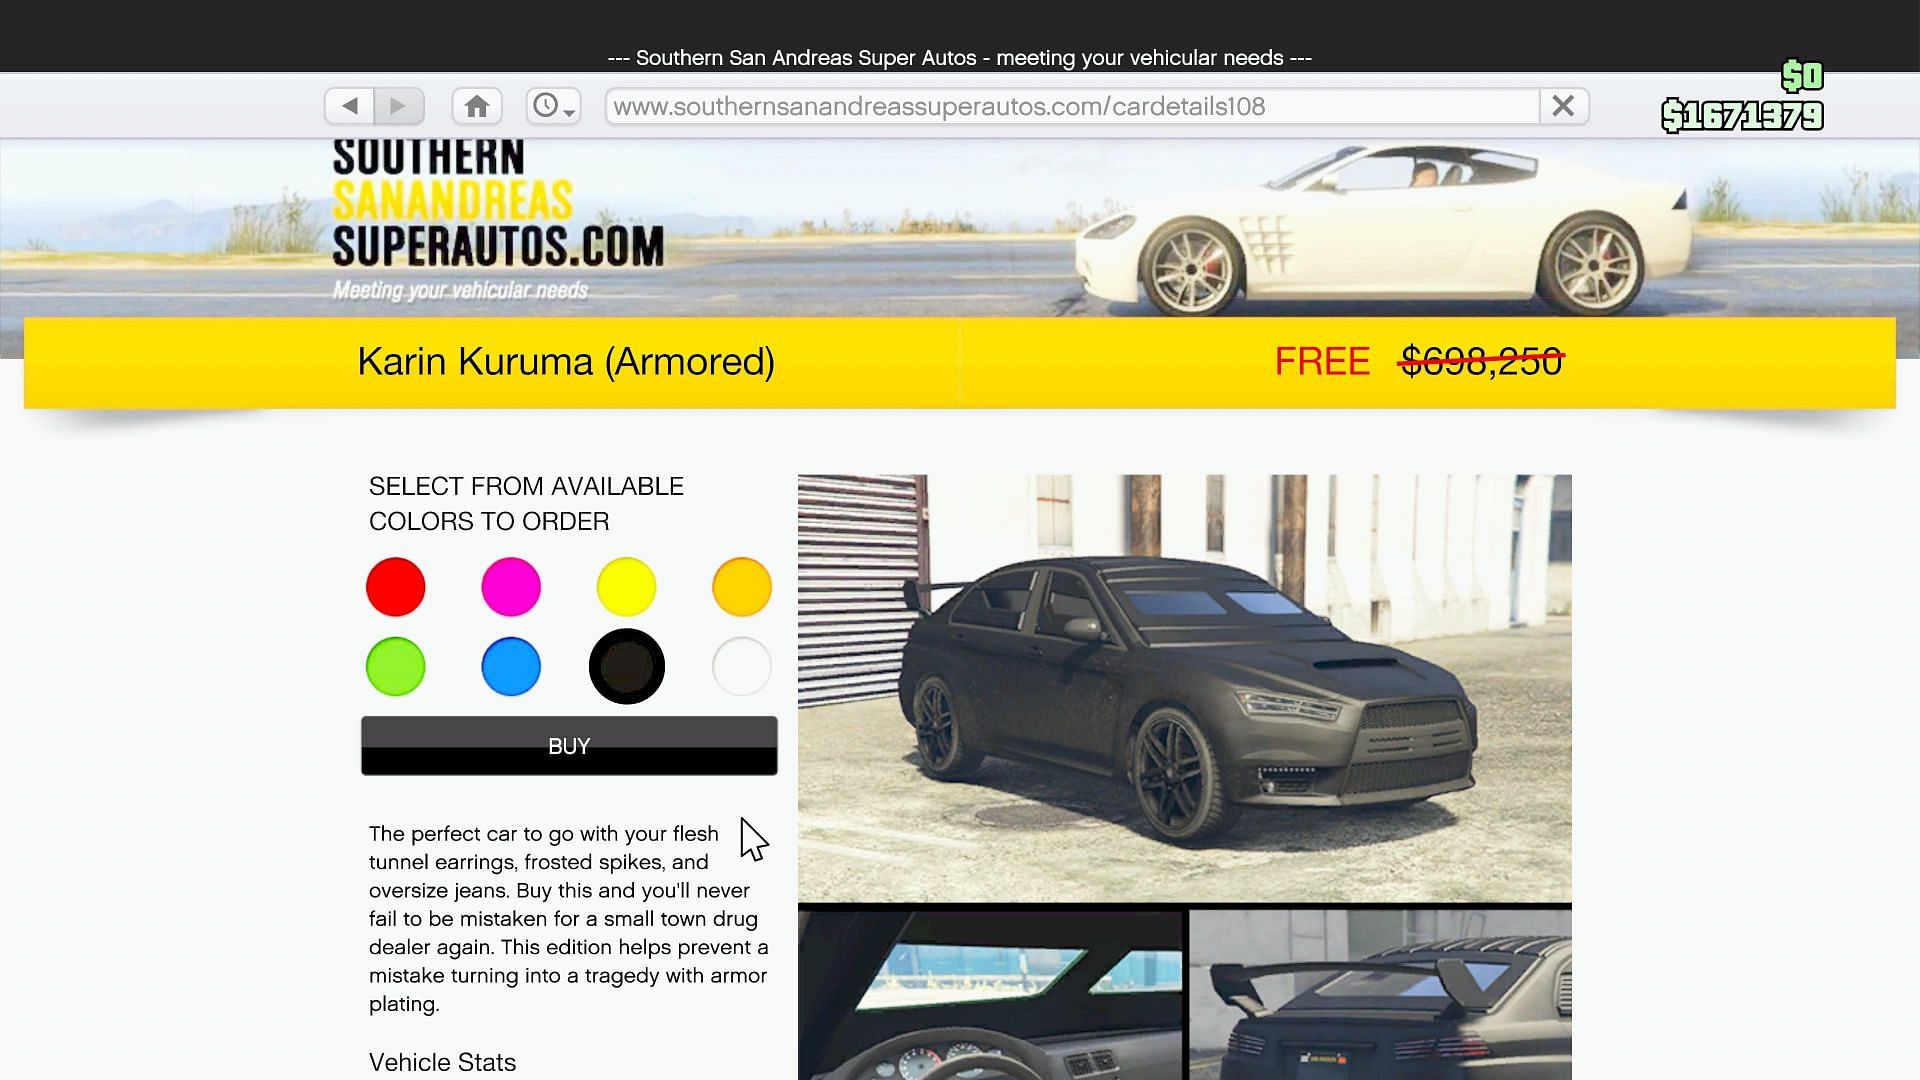 You should see this when buying the car (Image via Rockstar Games)